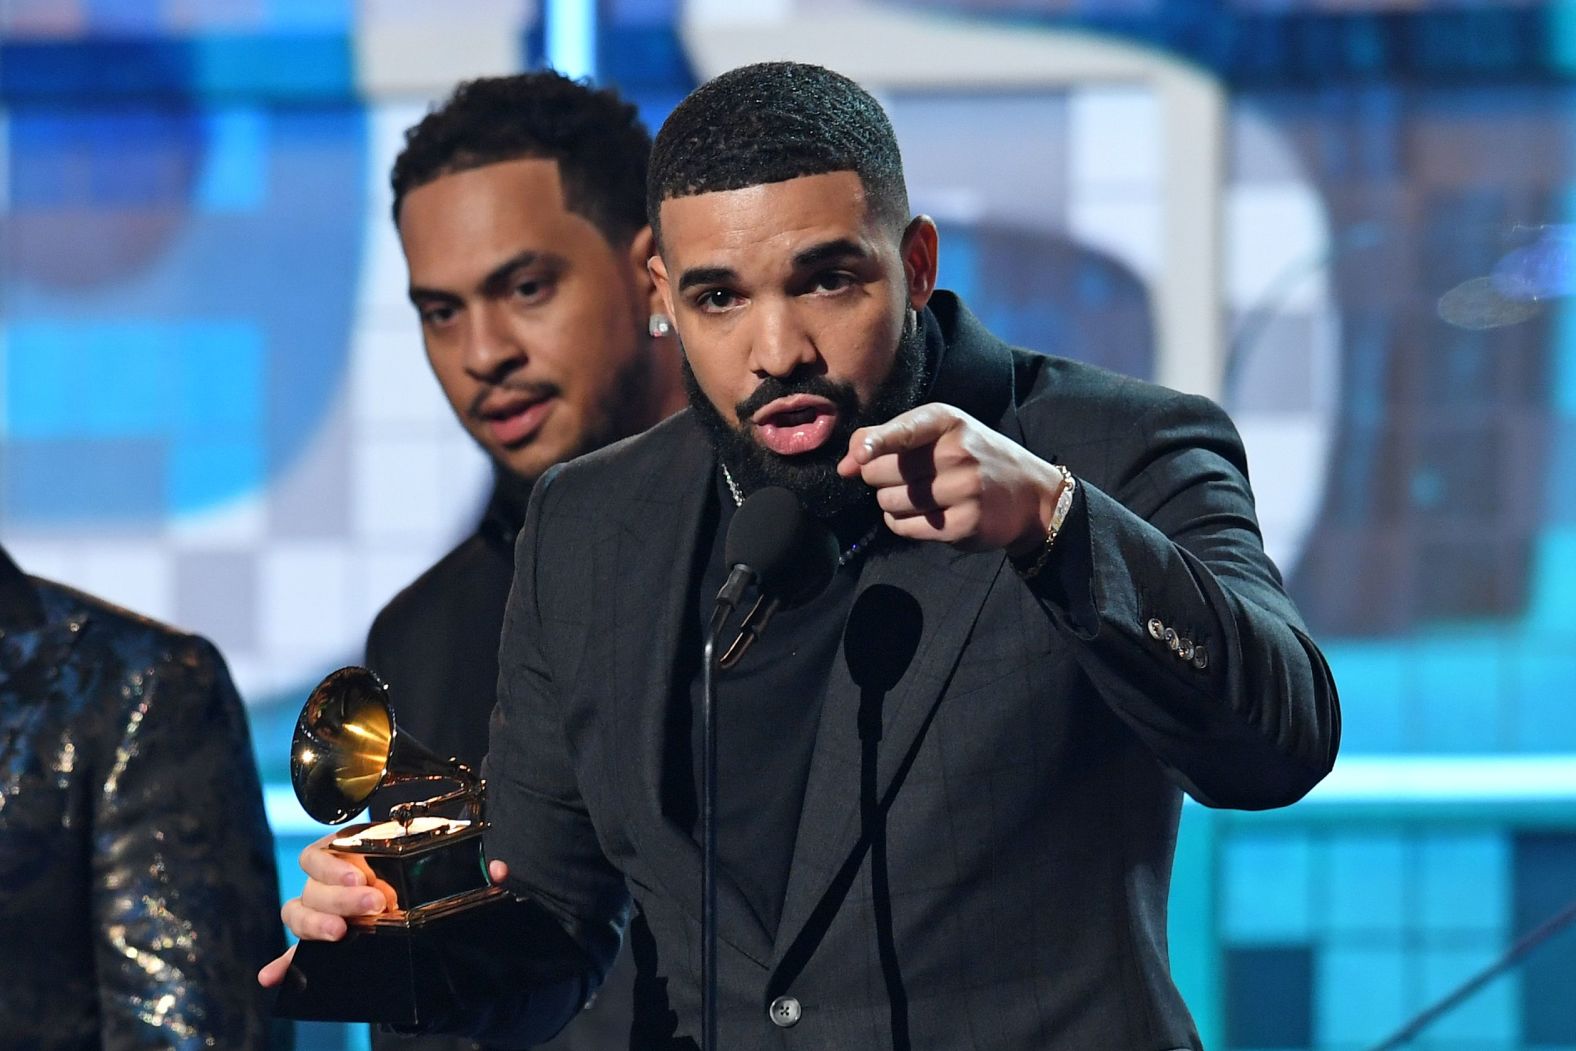 Drake accepts the award for "God's Plan," which won best rap song. He had some encouraging words for young artists and those who aren't getting awards. "You've already won if you have people who are singing your songs word for word," he said.